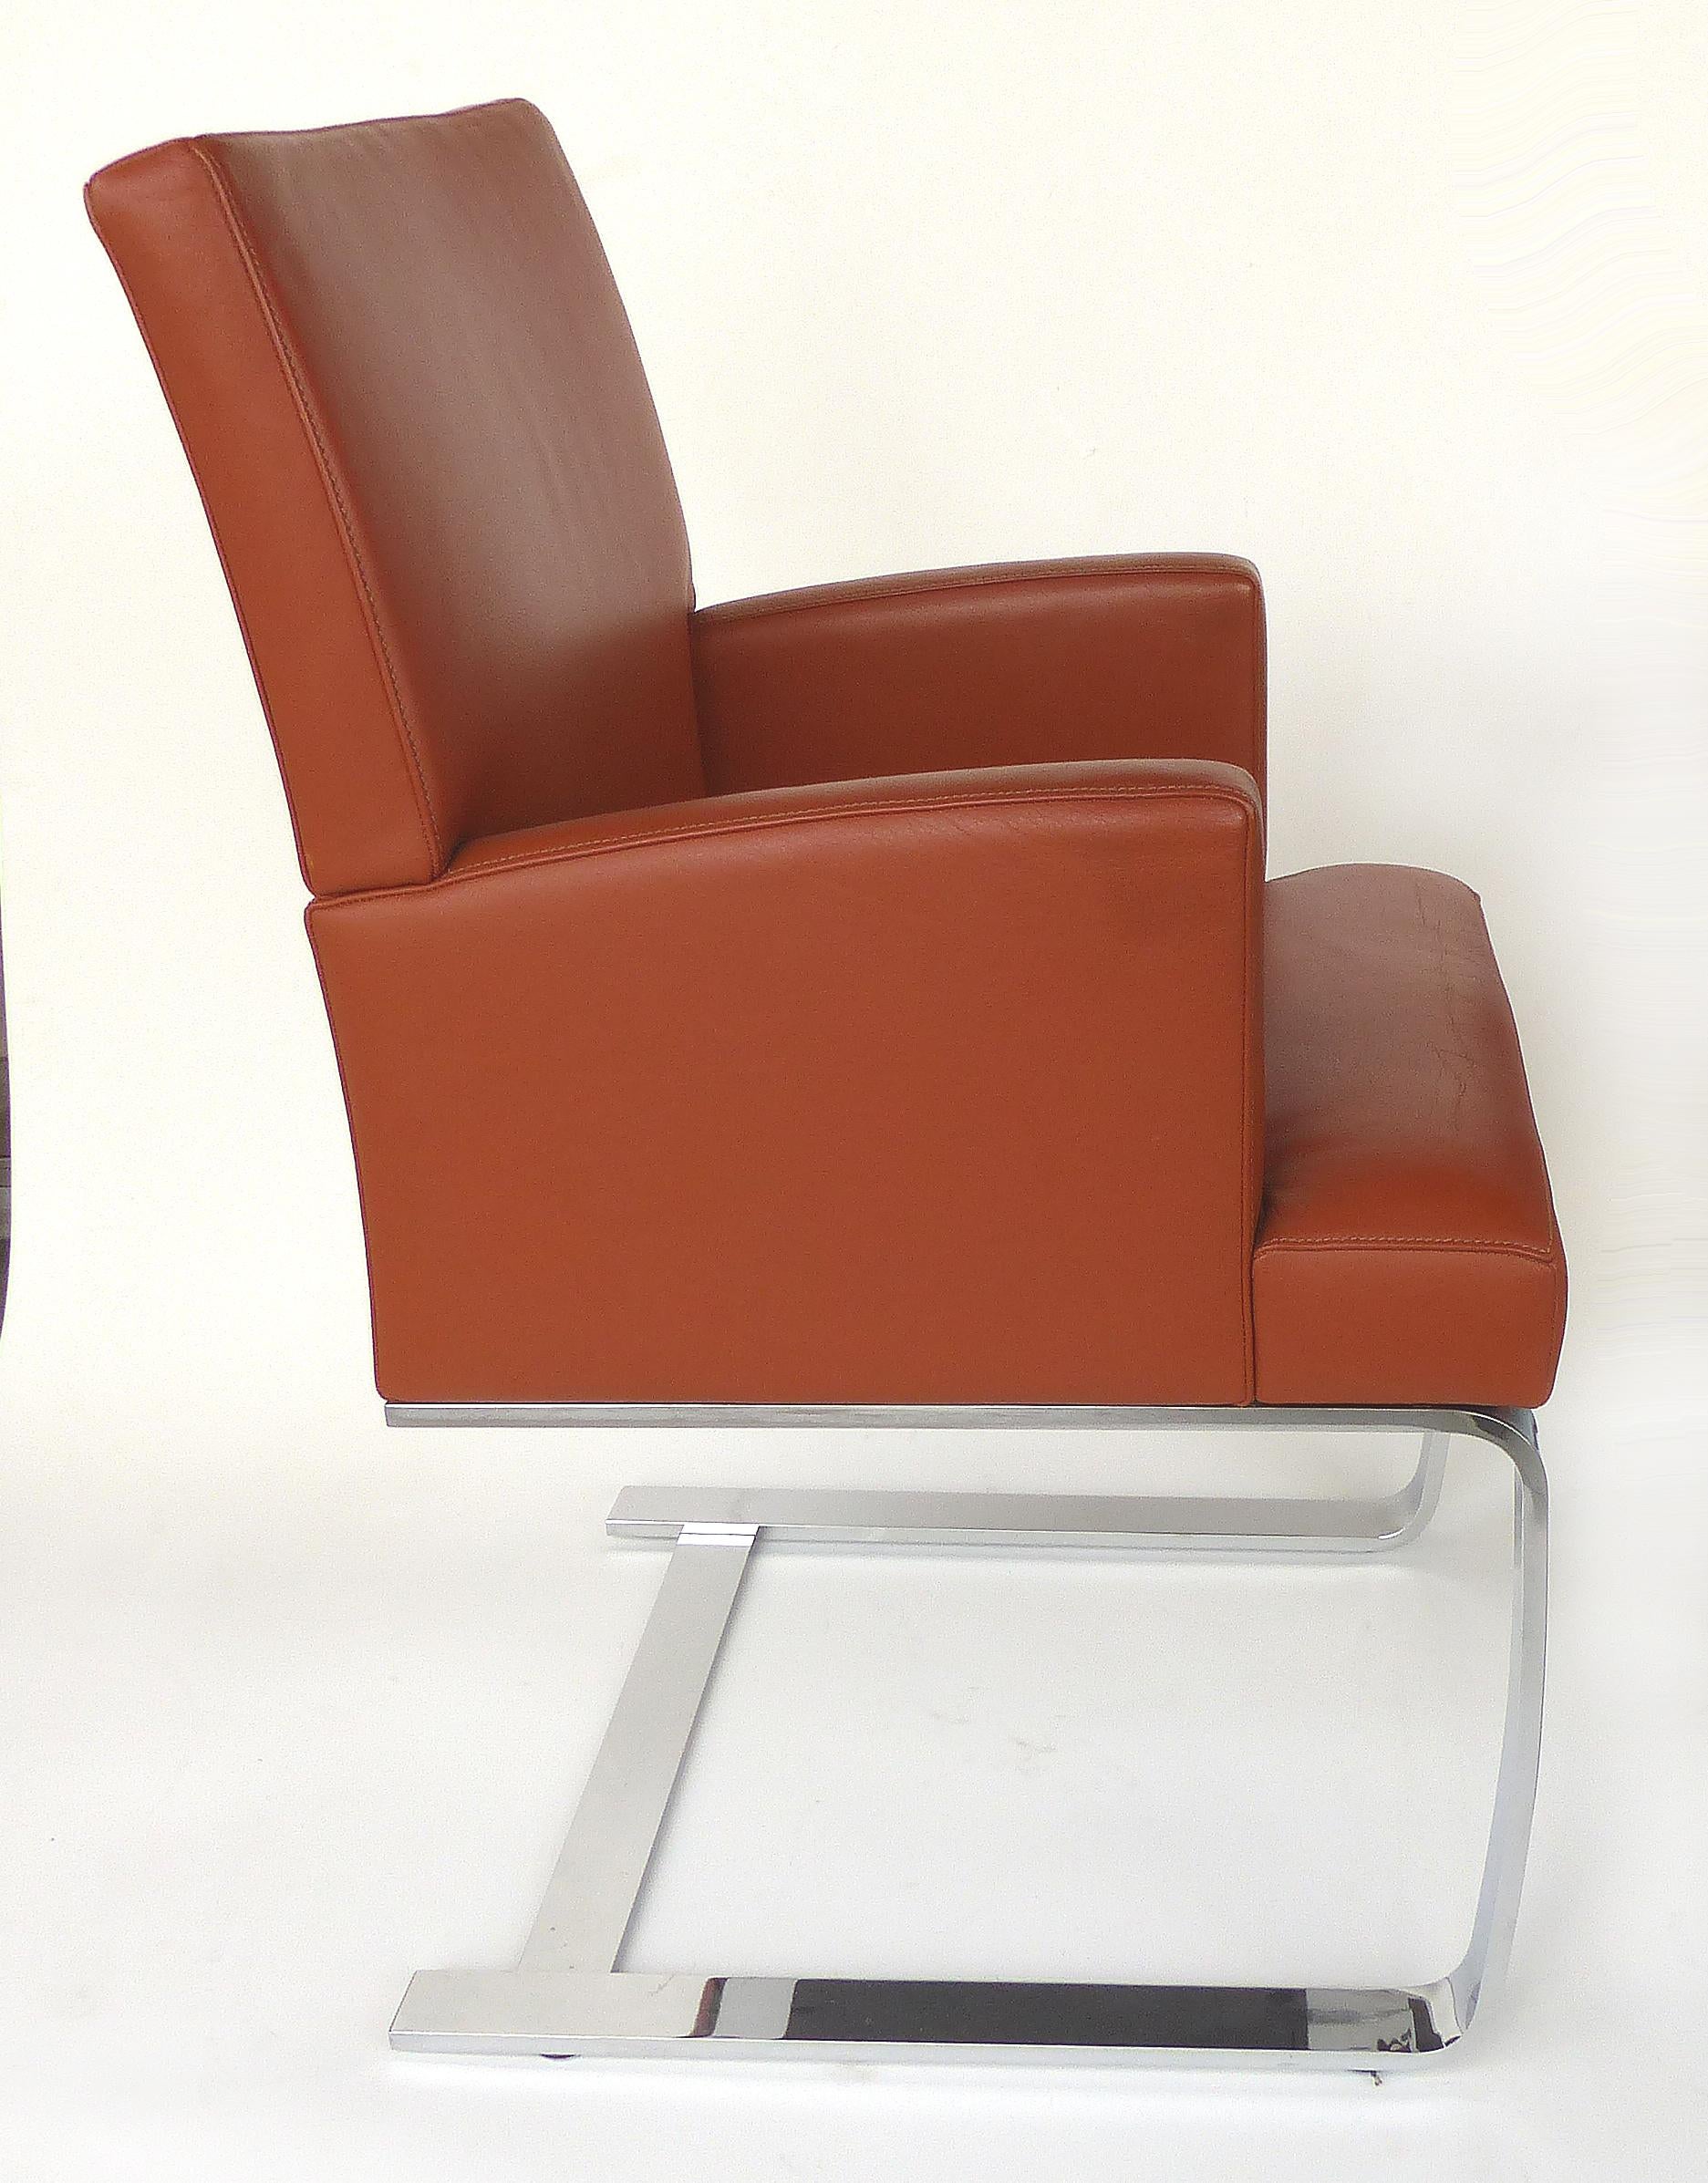 Swiss De Sede of Switzerland Cantilevered Leather and Stainless Steel Chairs, '4'